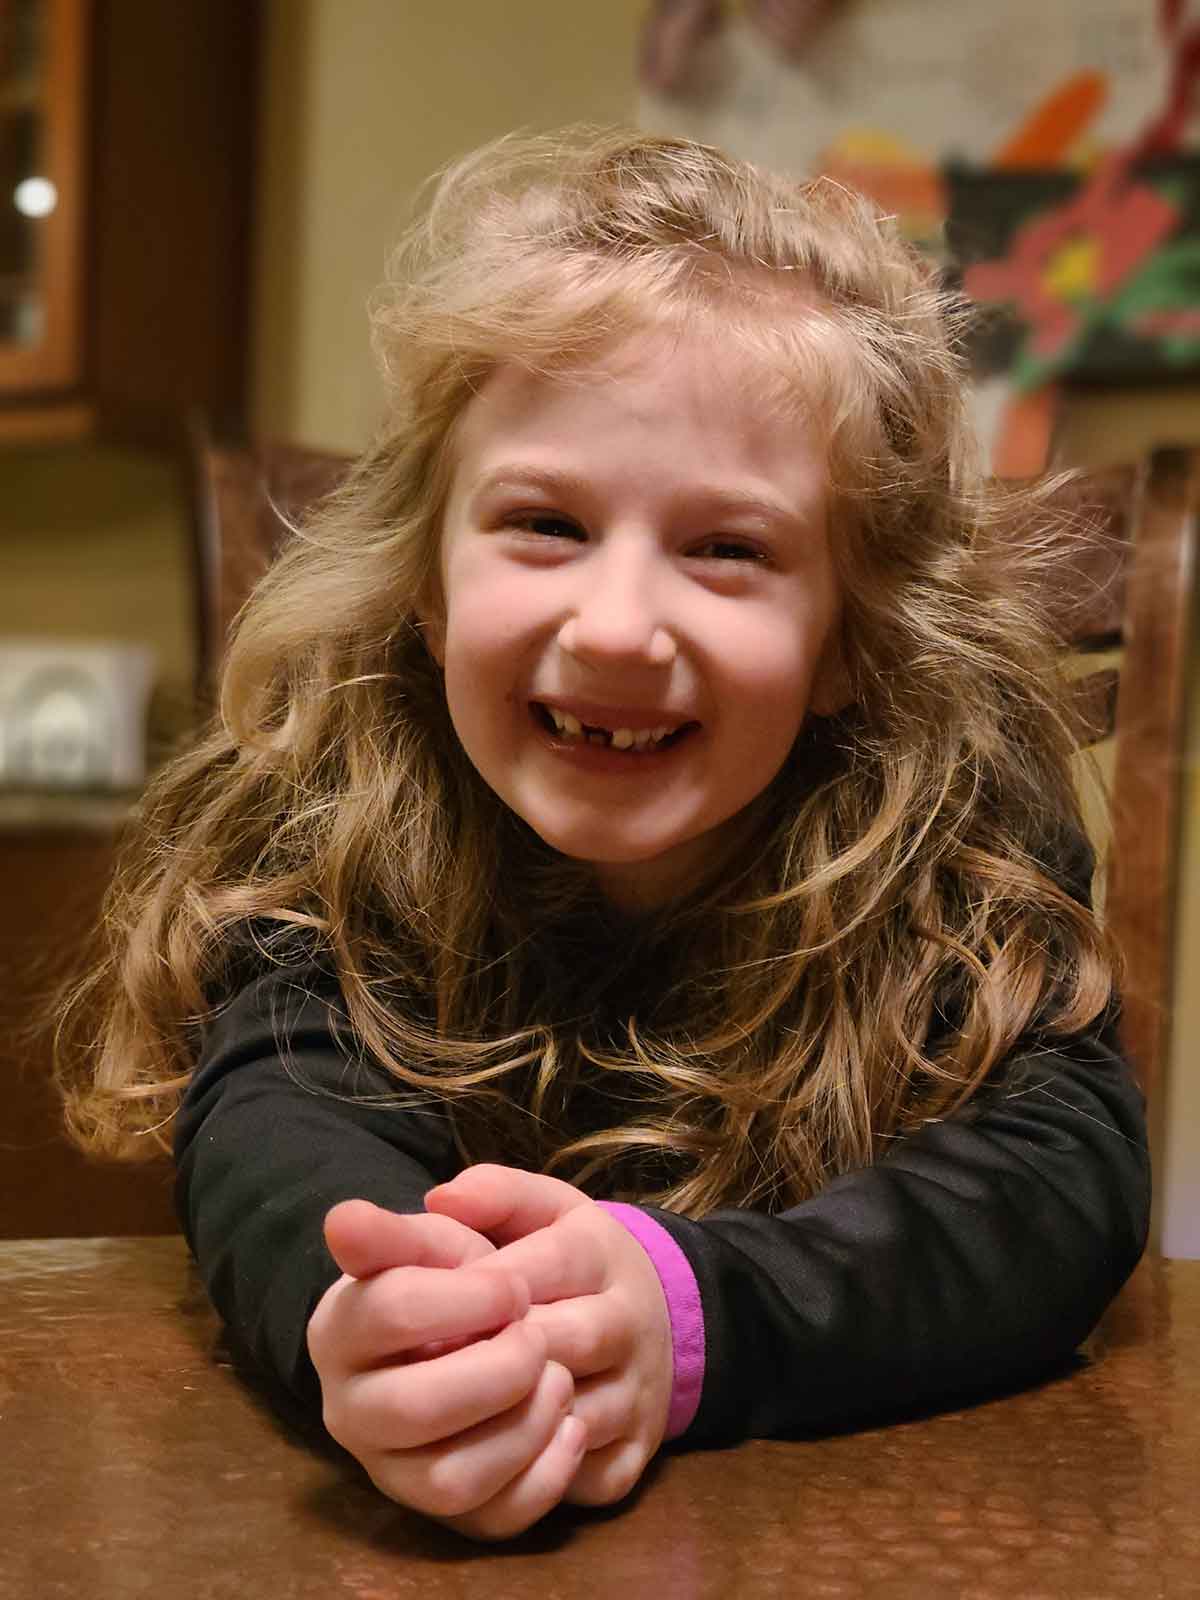 Little girl sitting at a table smiling.